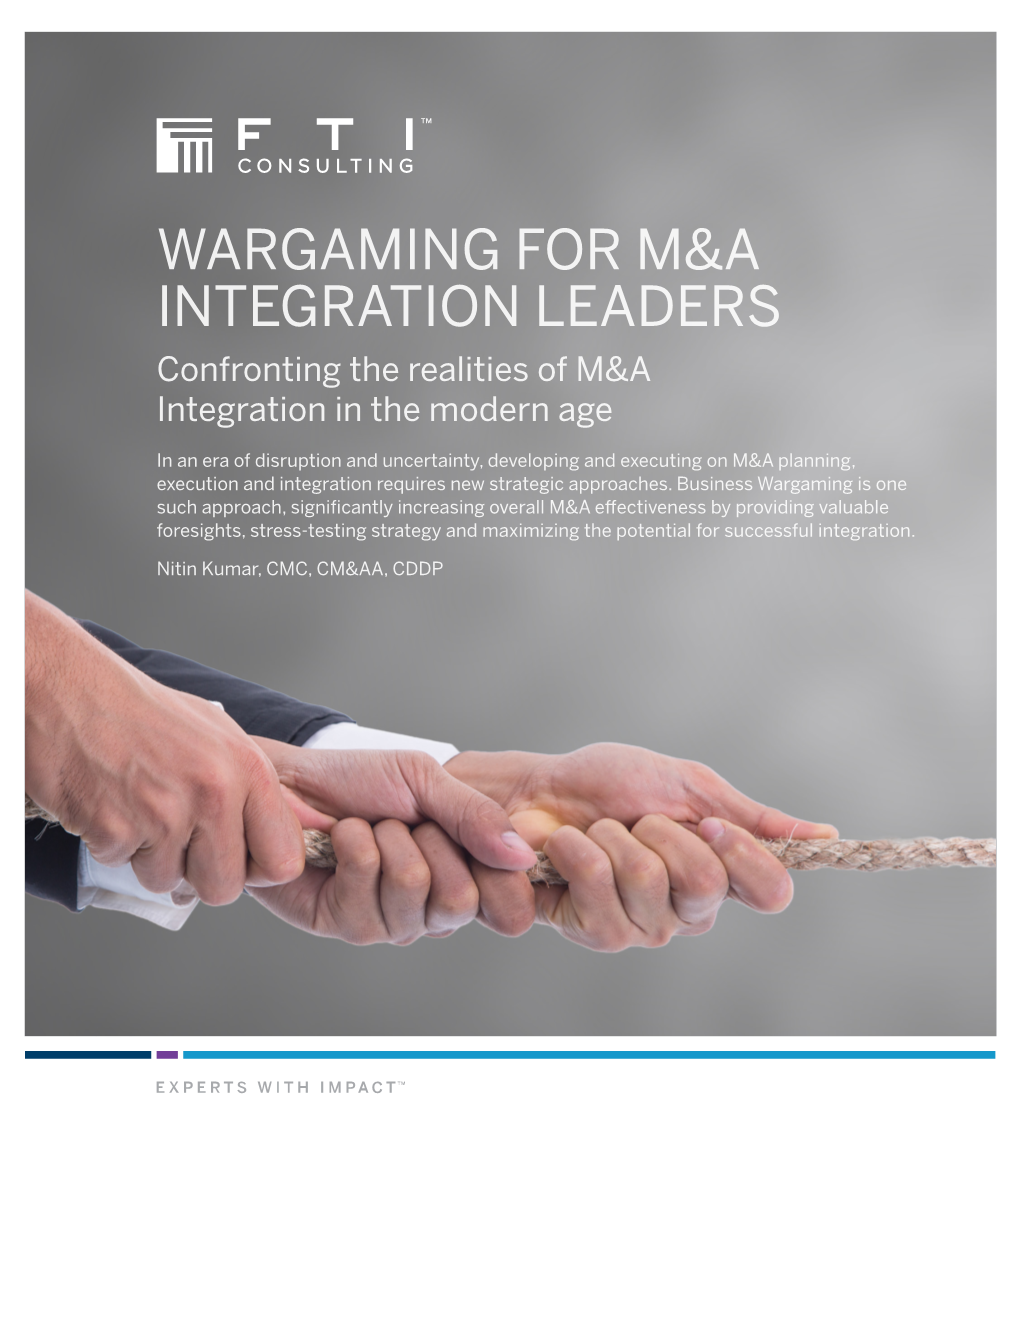 Wargaming for M&A Integration Leaders